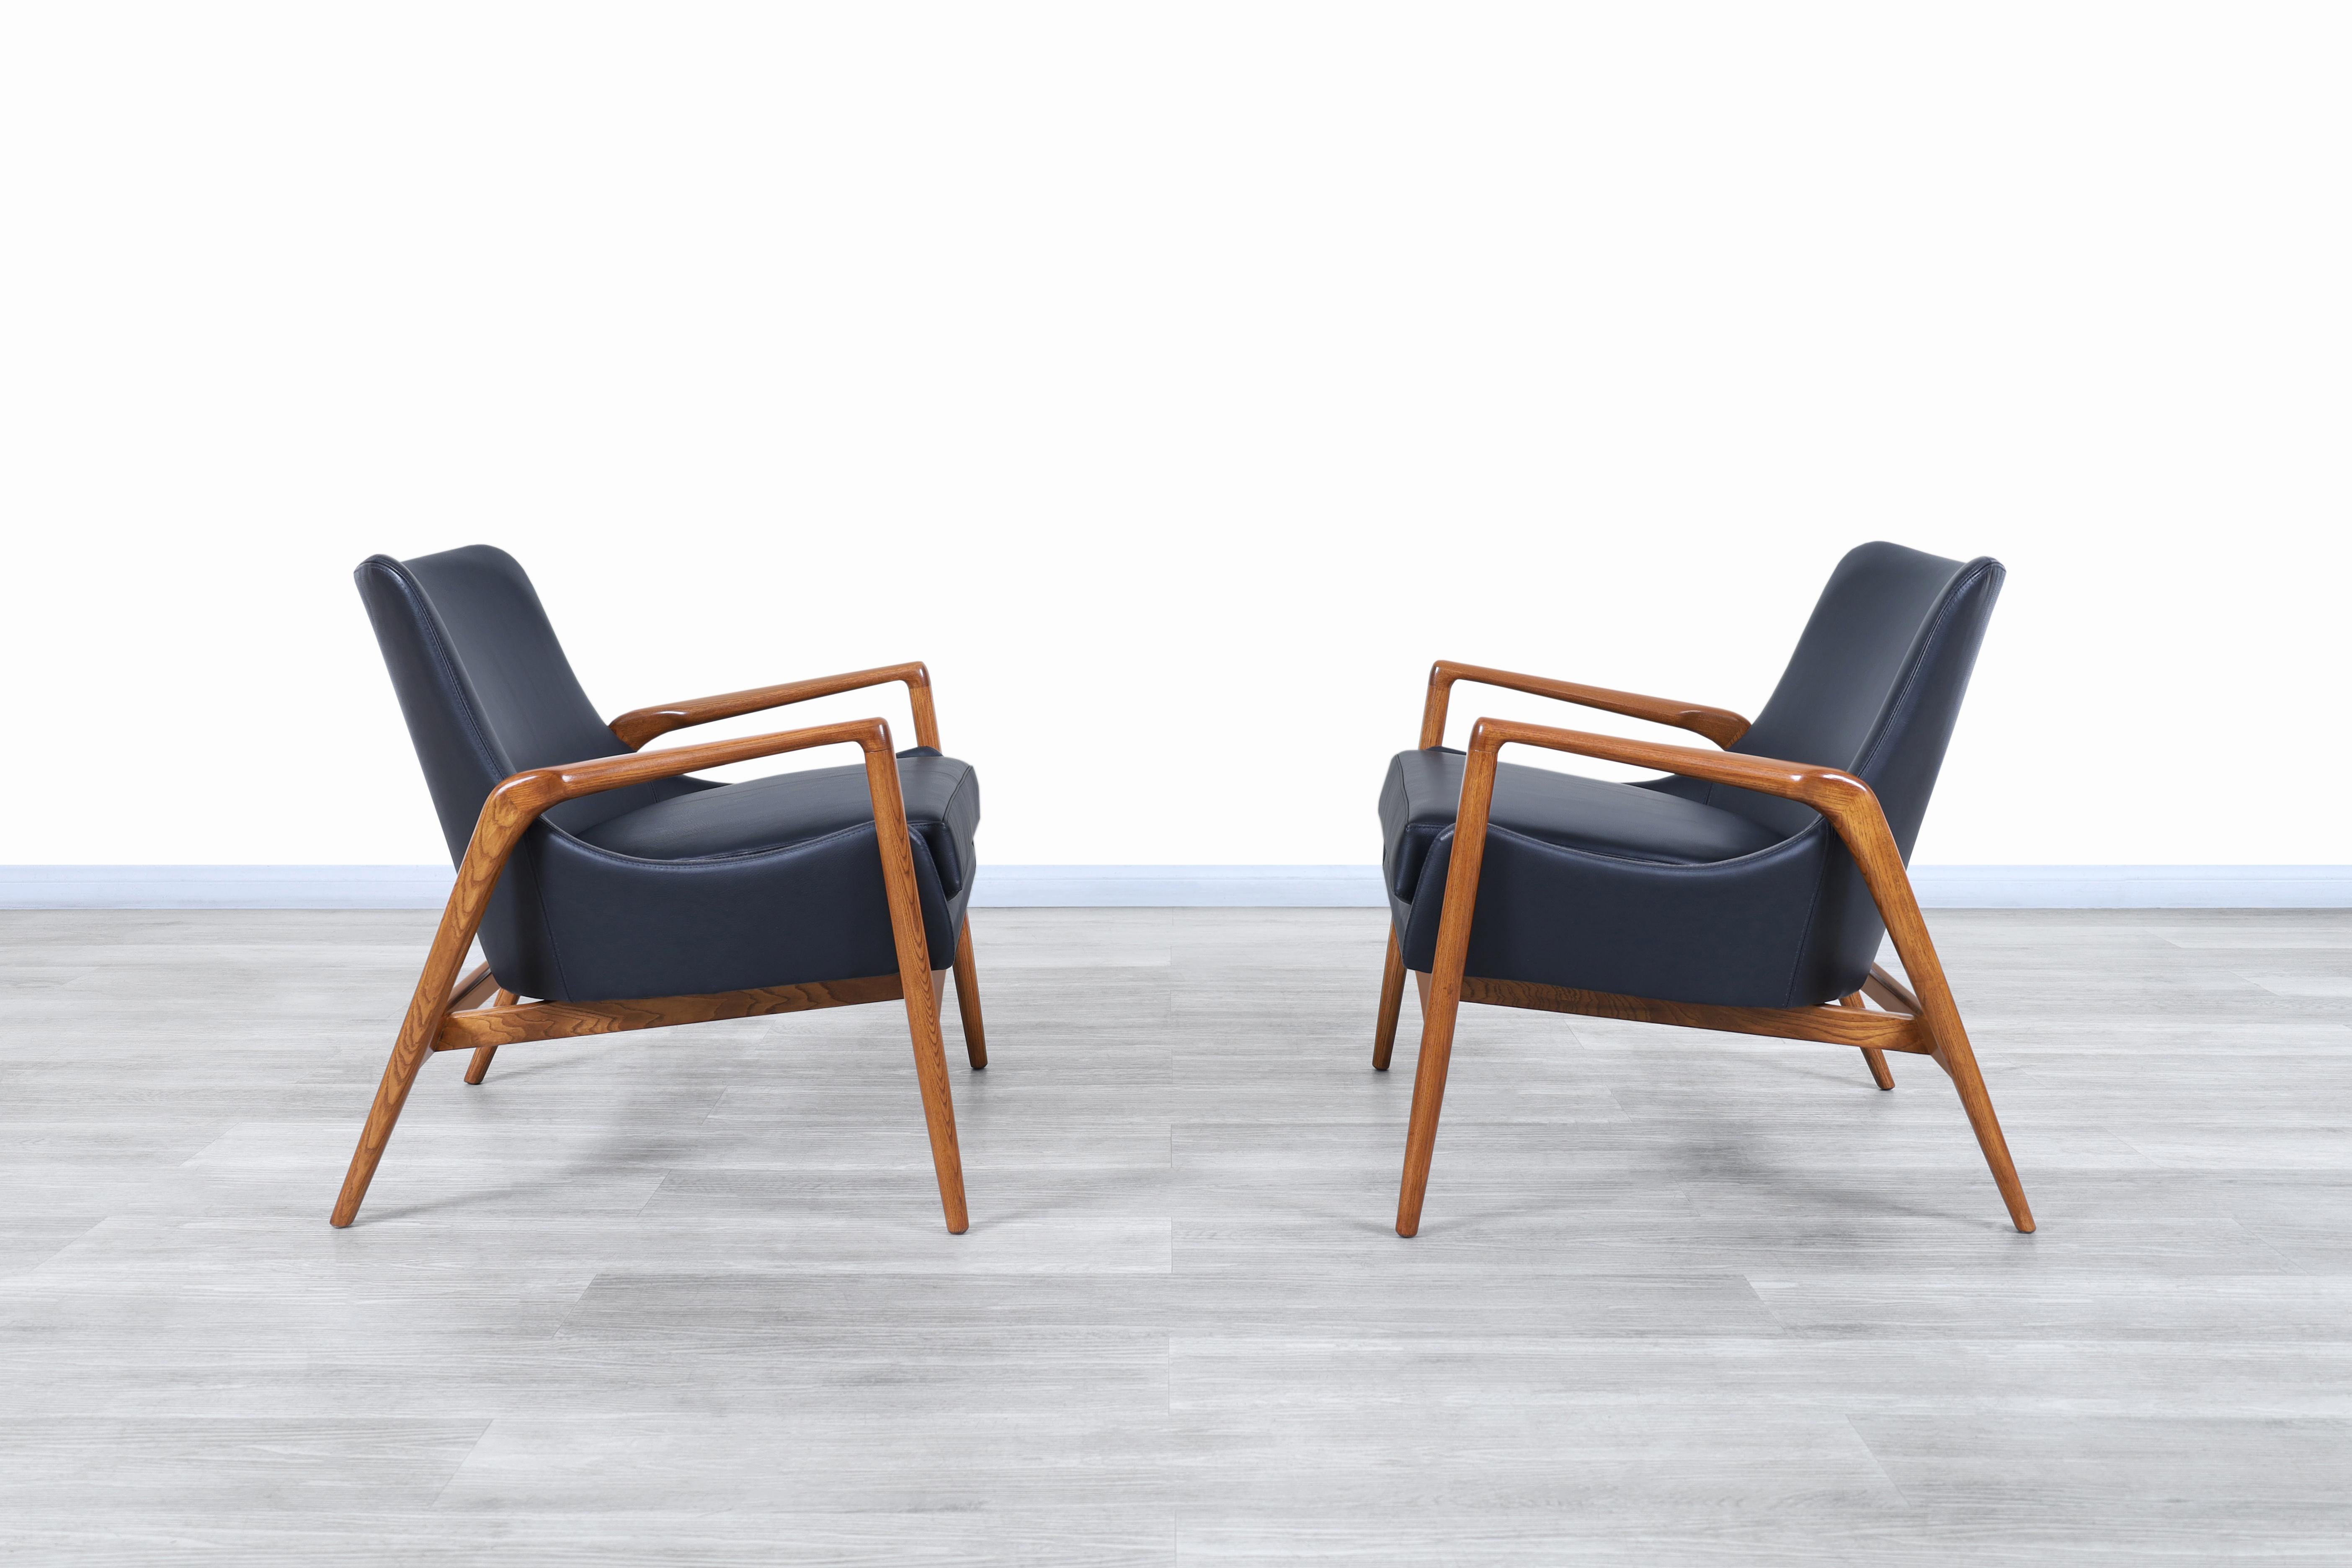 Mid-20th Century Danish Modern Leather Lounge Chairs by Ib Kofod Larsen for Selig